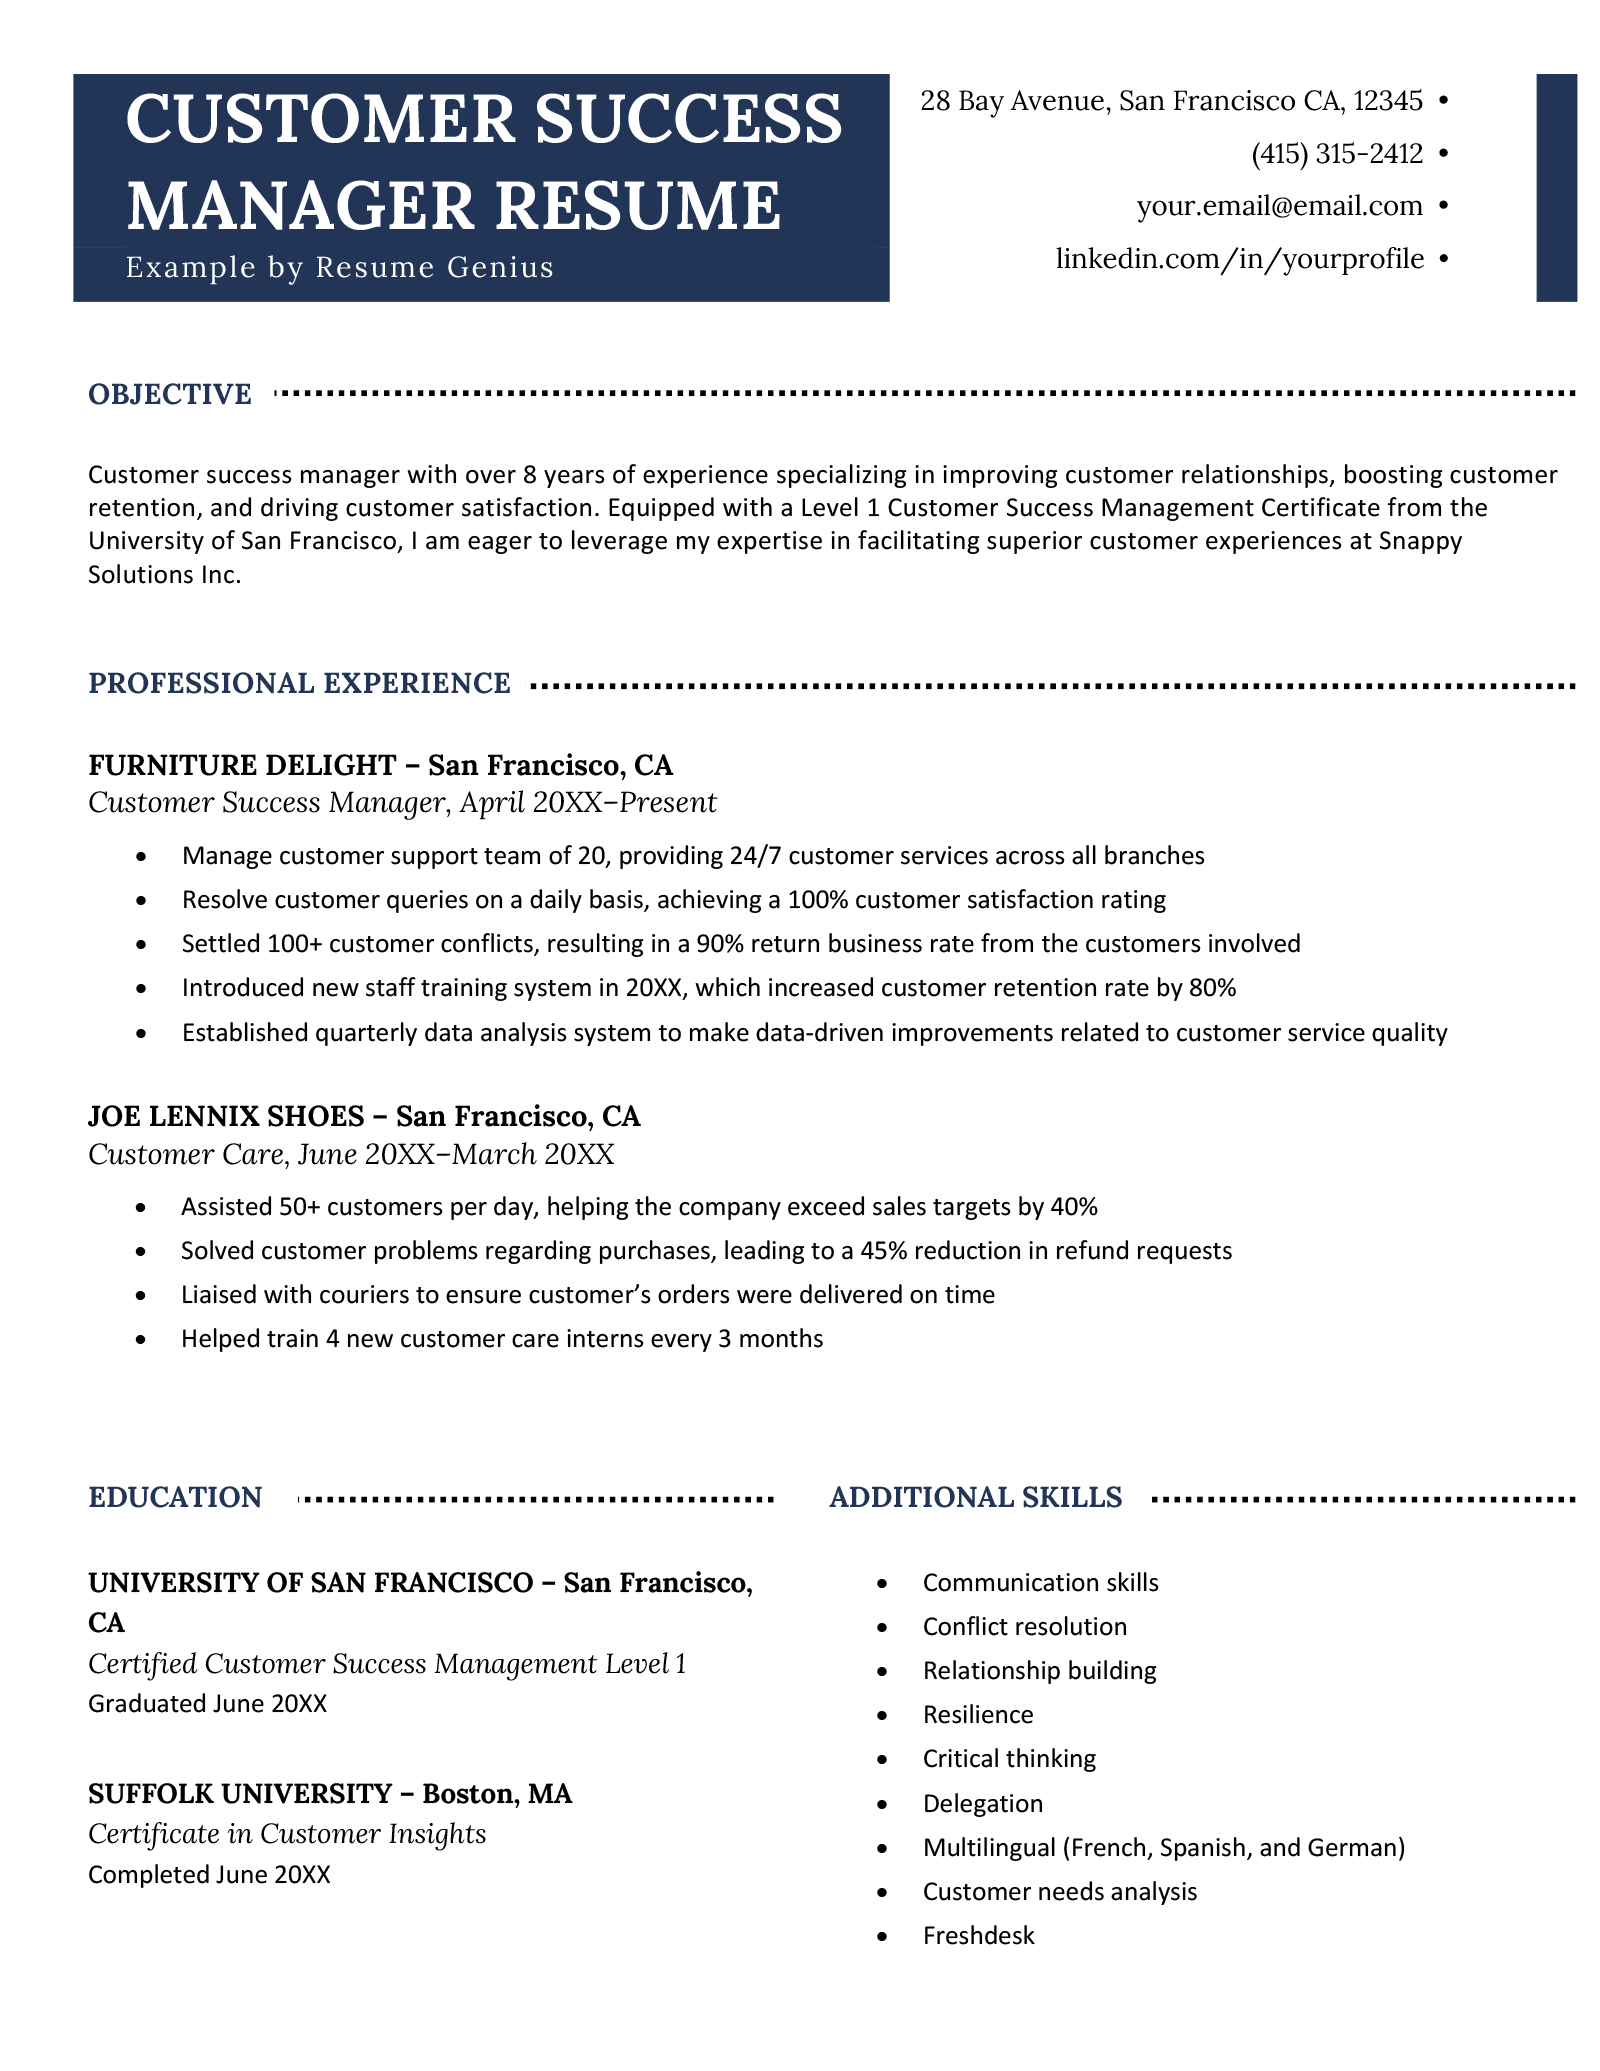 A customer success manager resume example on a template with a left-aligned dark blue header to accentuate the applicant's name and contact details